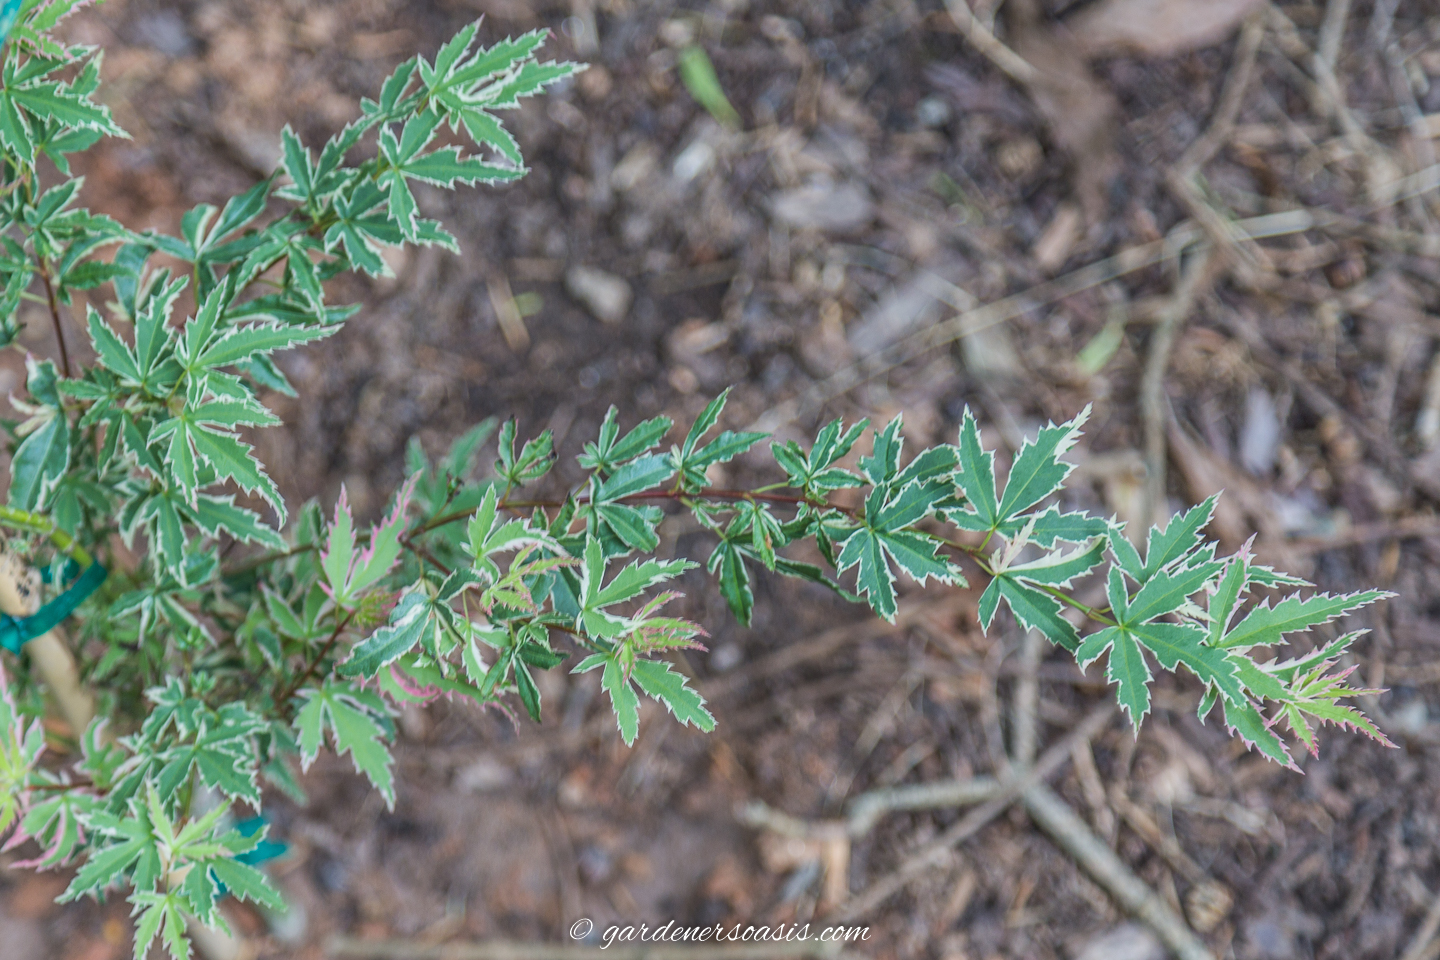 Japanese Maples like a lot of mulch | 10 Surprising Things About Growing Beautiful Japanese Maples | If you want to add a Japanese Maple to your landscape (or you already have one growing in your garden) but aren't sure how to care for it, these tips on fertilizing, pruning and growing in containers (among other things) are very helpful!